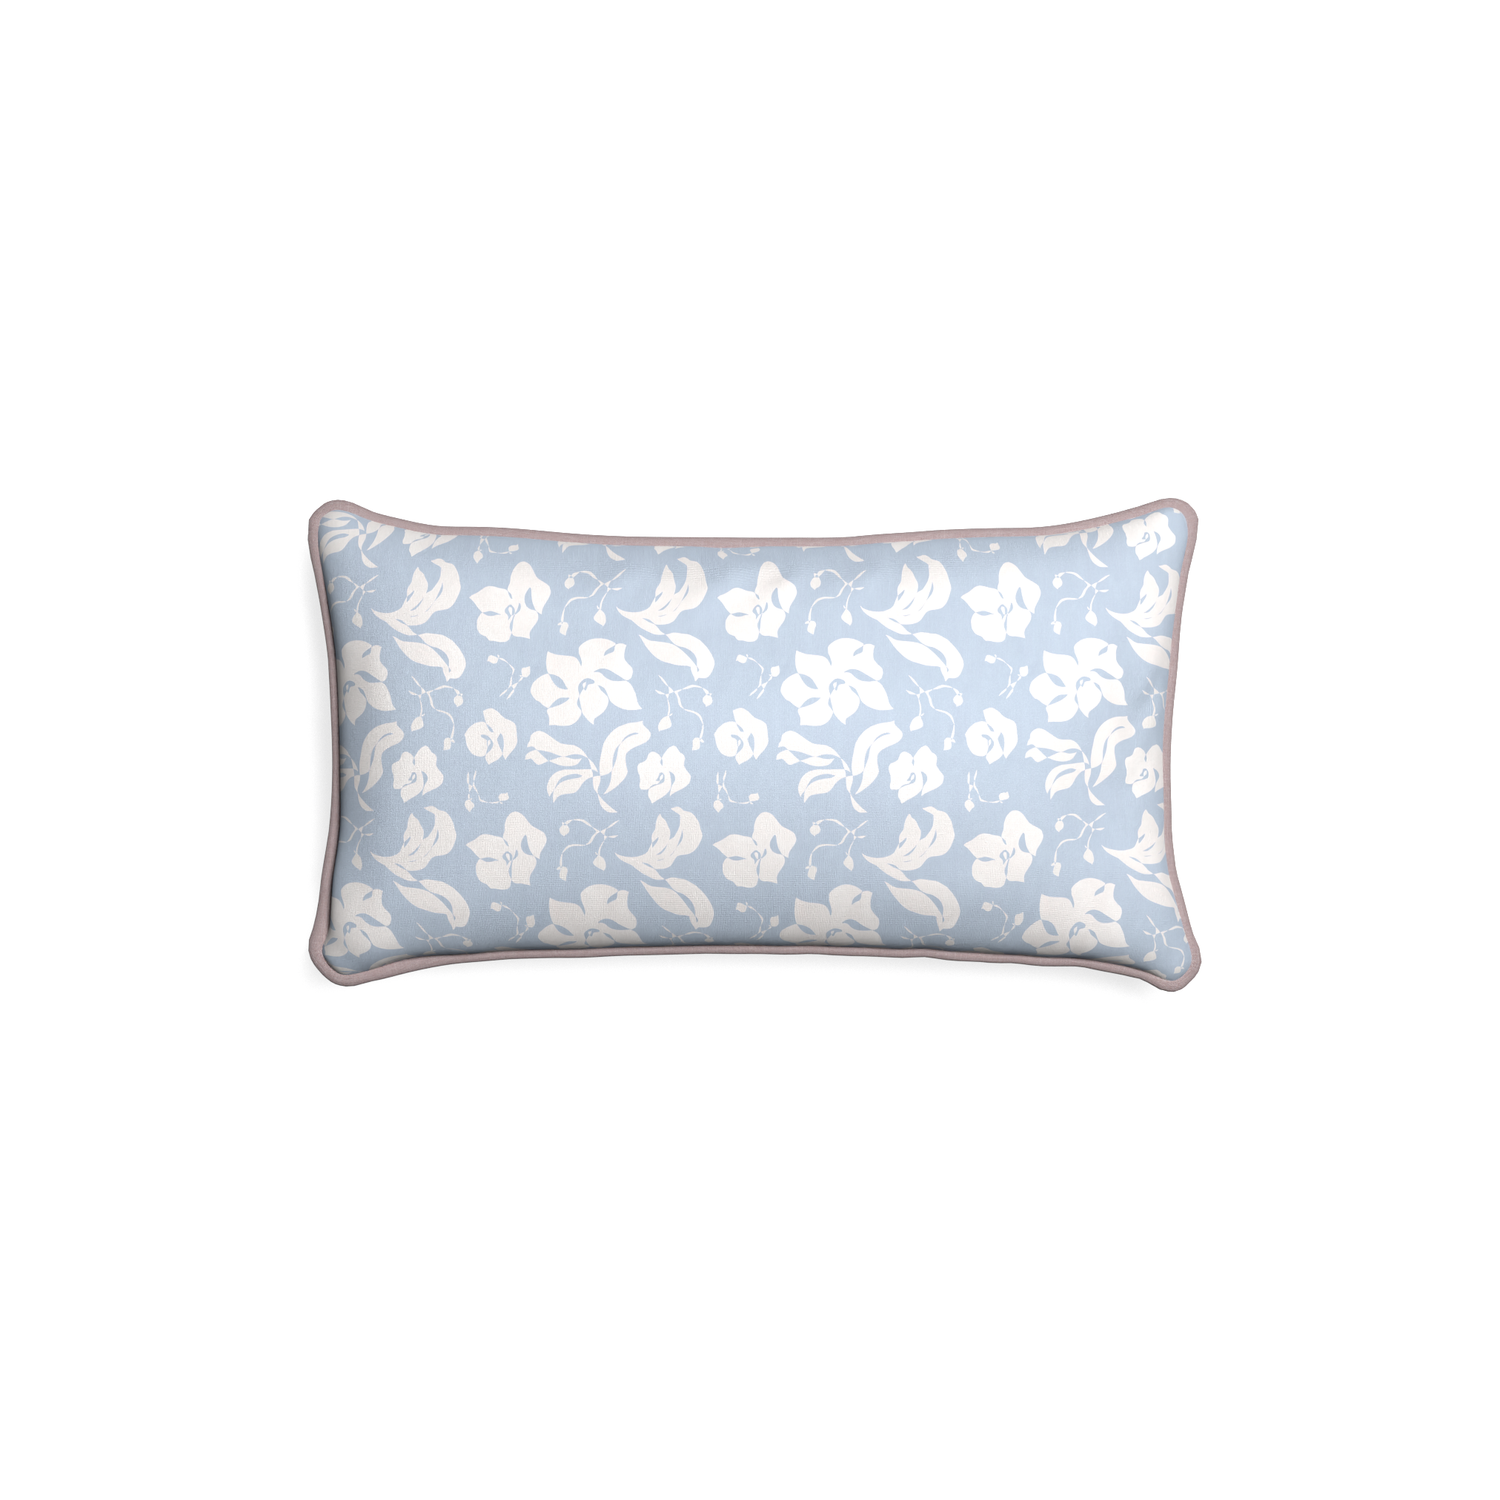 Petite-lumbar georgia custom cornflower blue floralpillow with orchid piping on white background